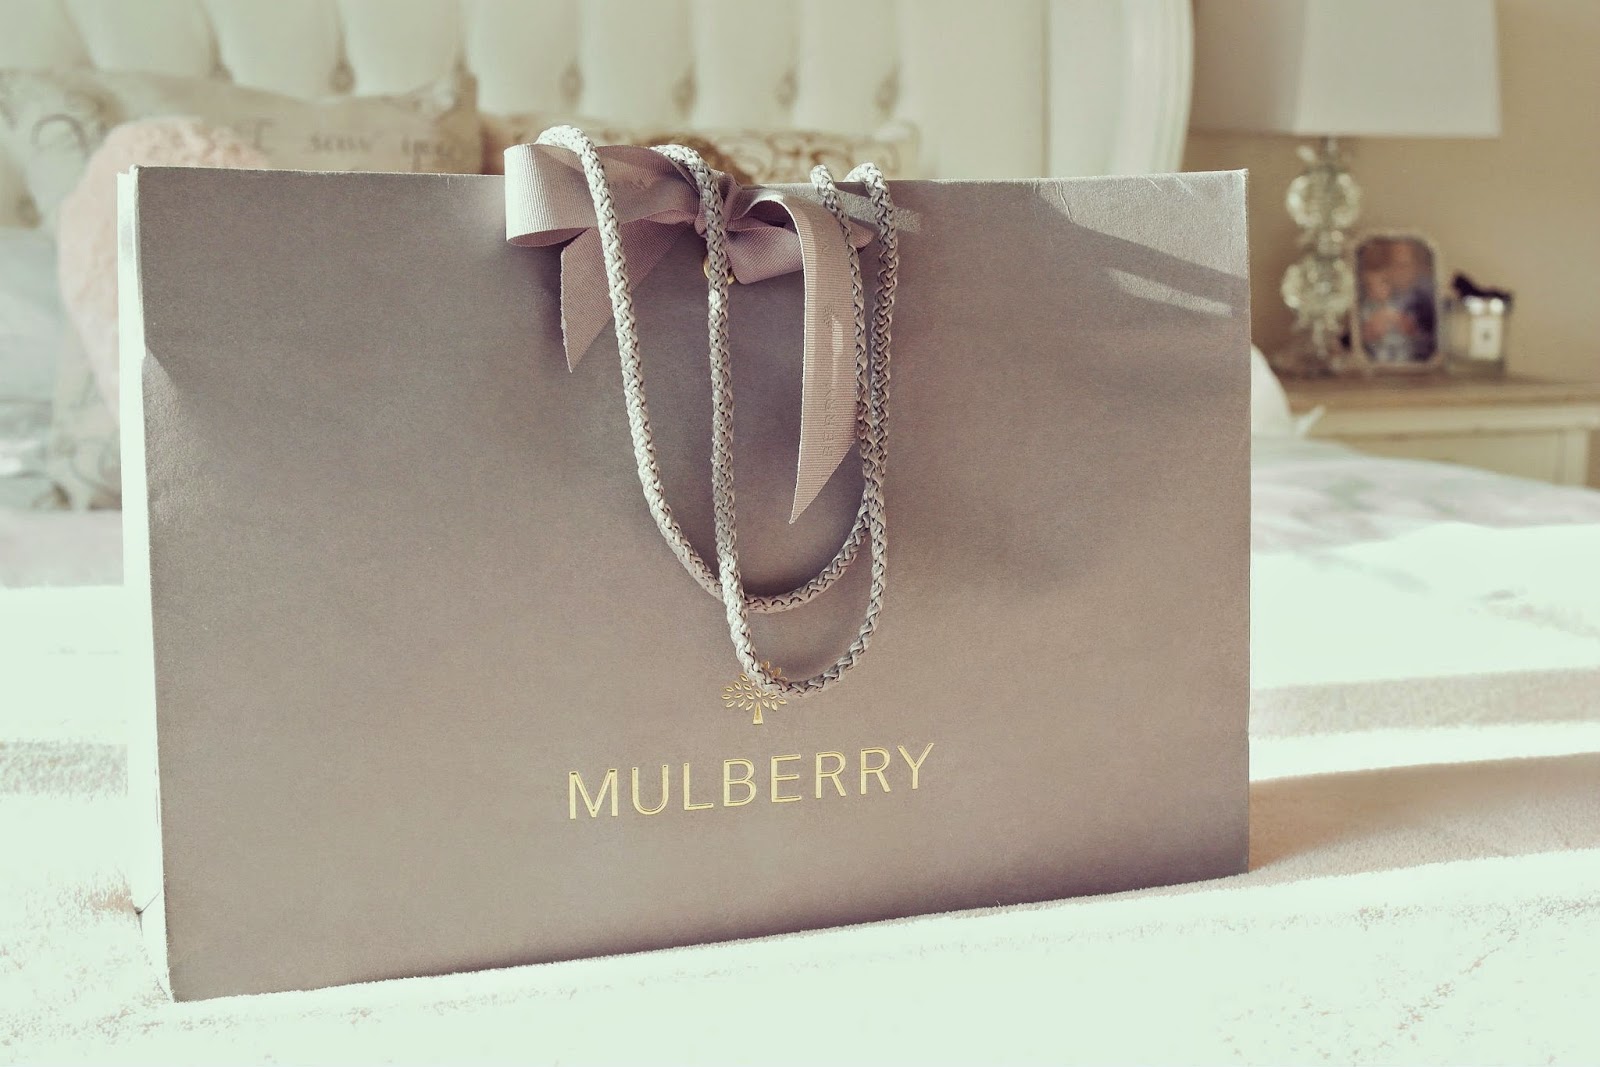 Mulberry bag from Bicester Village